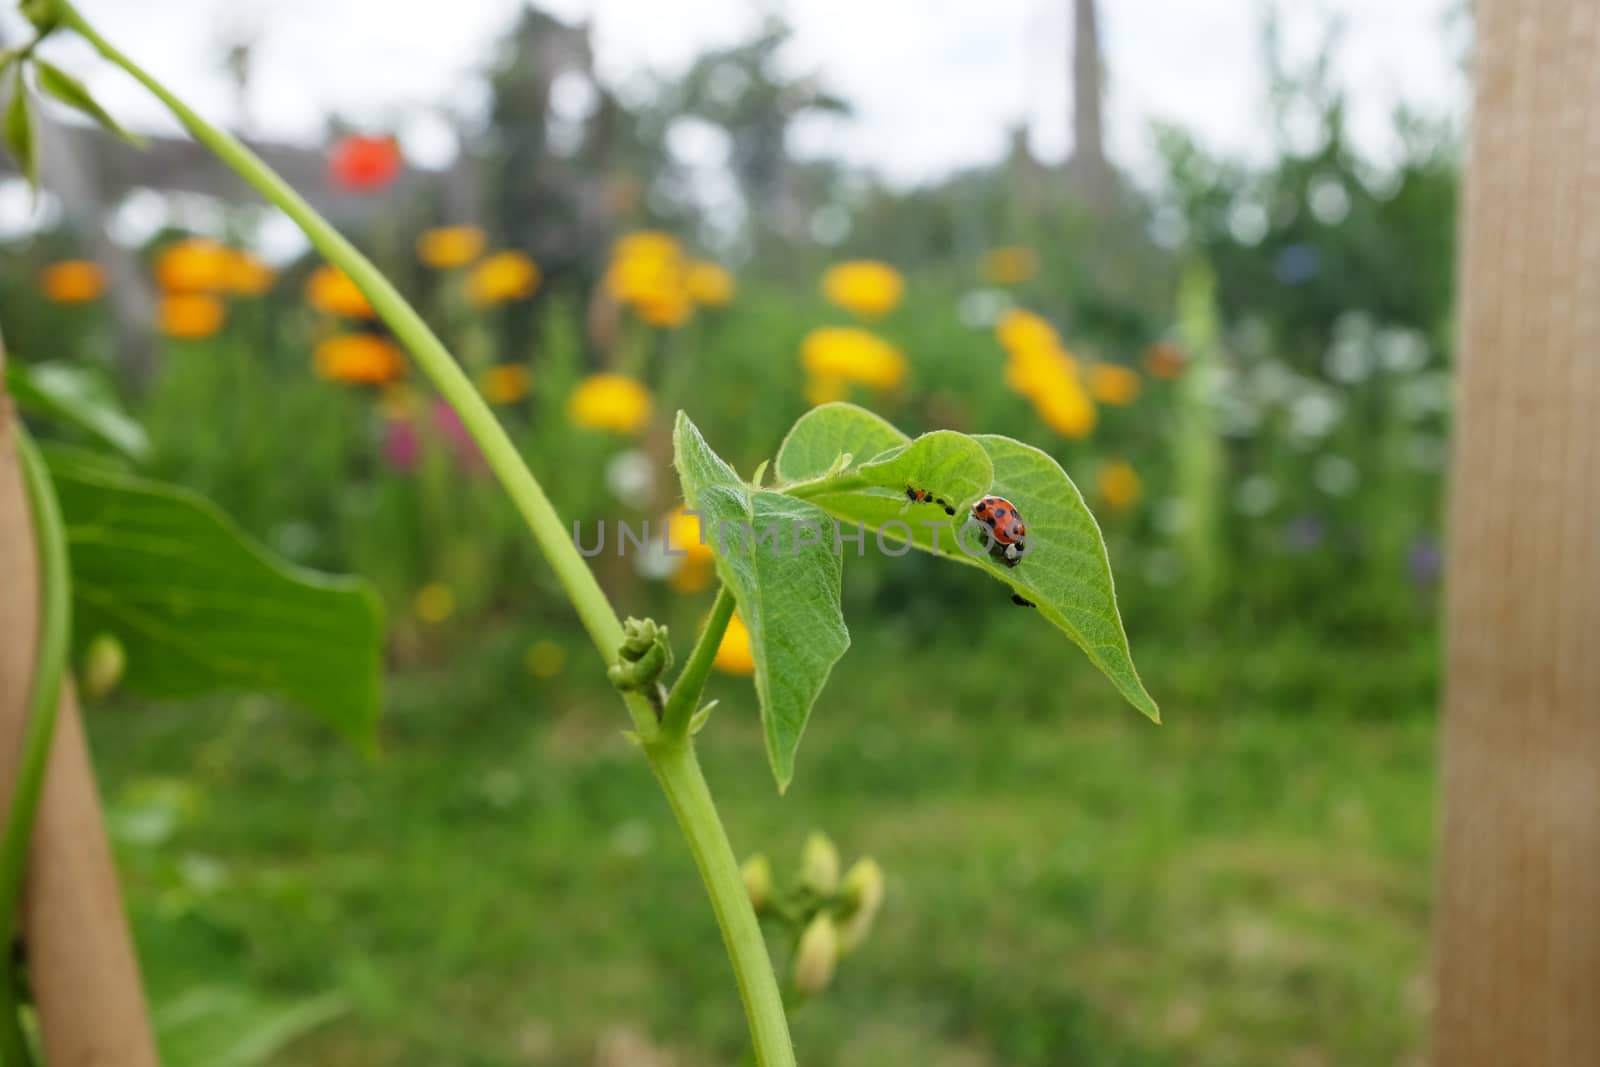 Harlequin ladybird on a green runner bean leaf infested with blackfly in a vegetable garden. Ladybugs are a natural predator of this pest.